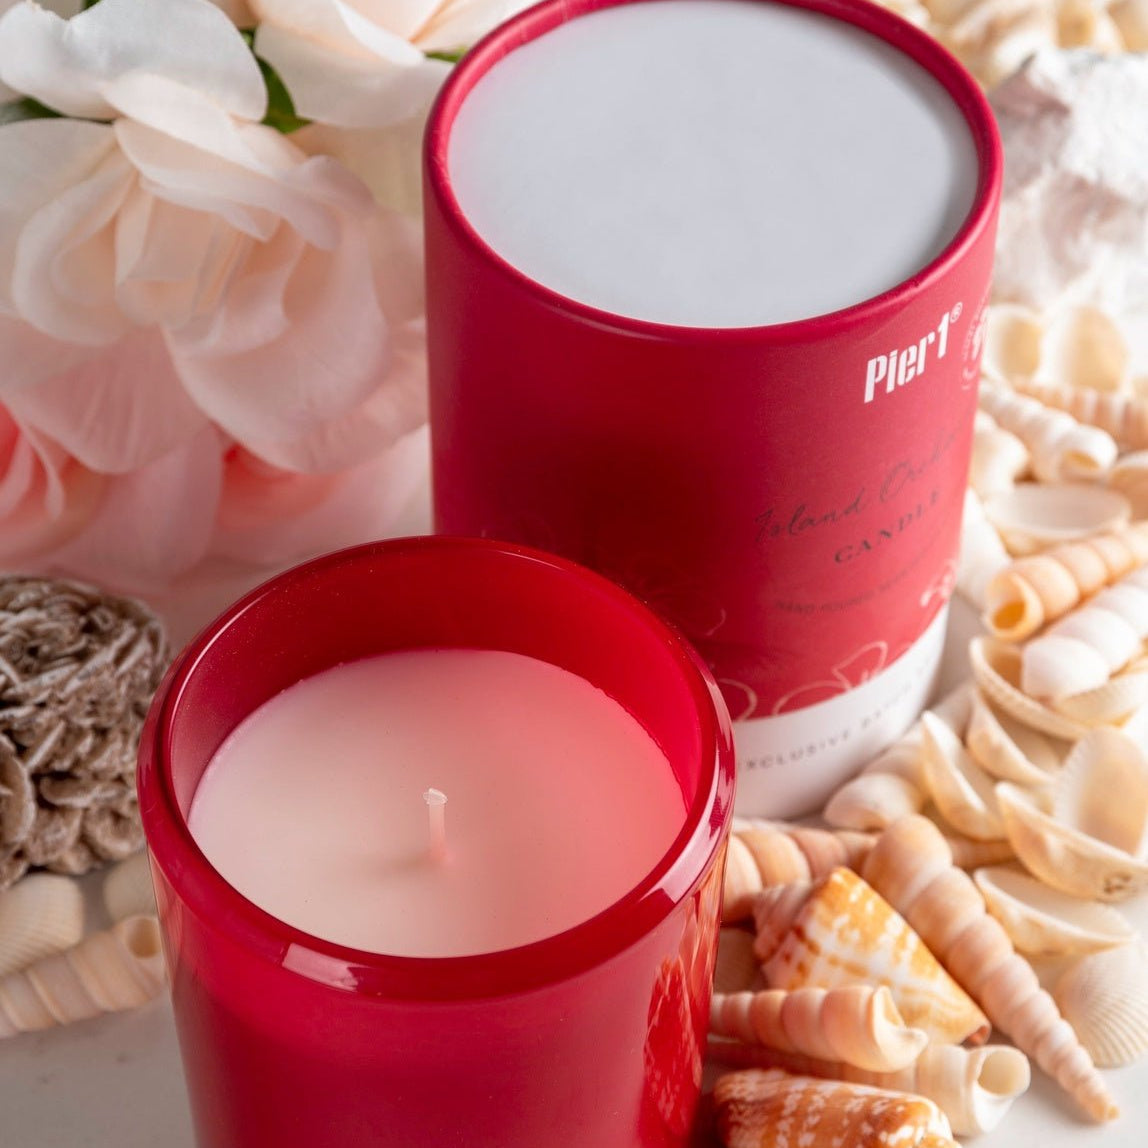 Pier 1 Island Orchard 8oz Boxed Soy Candle - Jar Candles